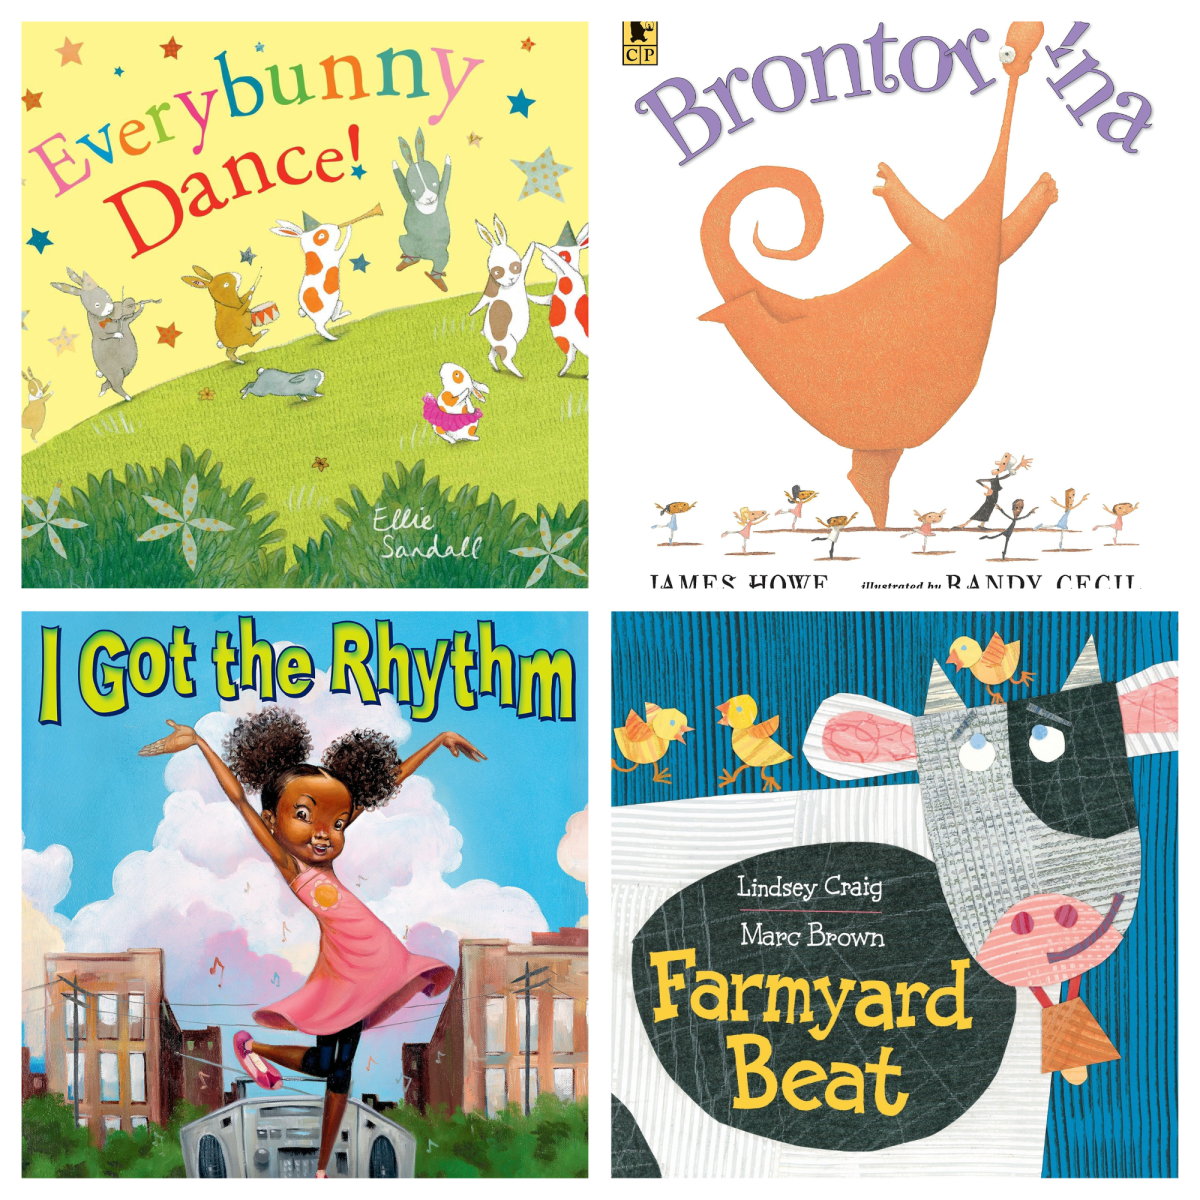 More children's picture books about dancing.